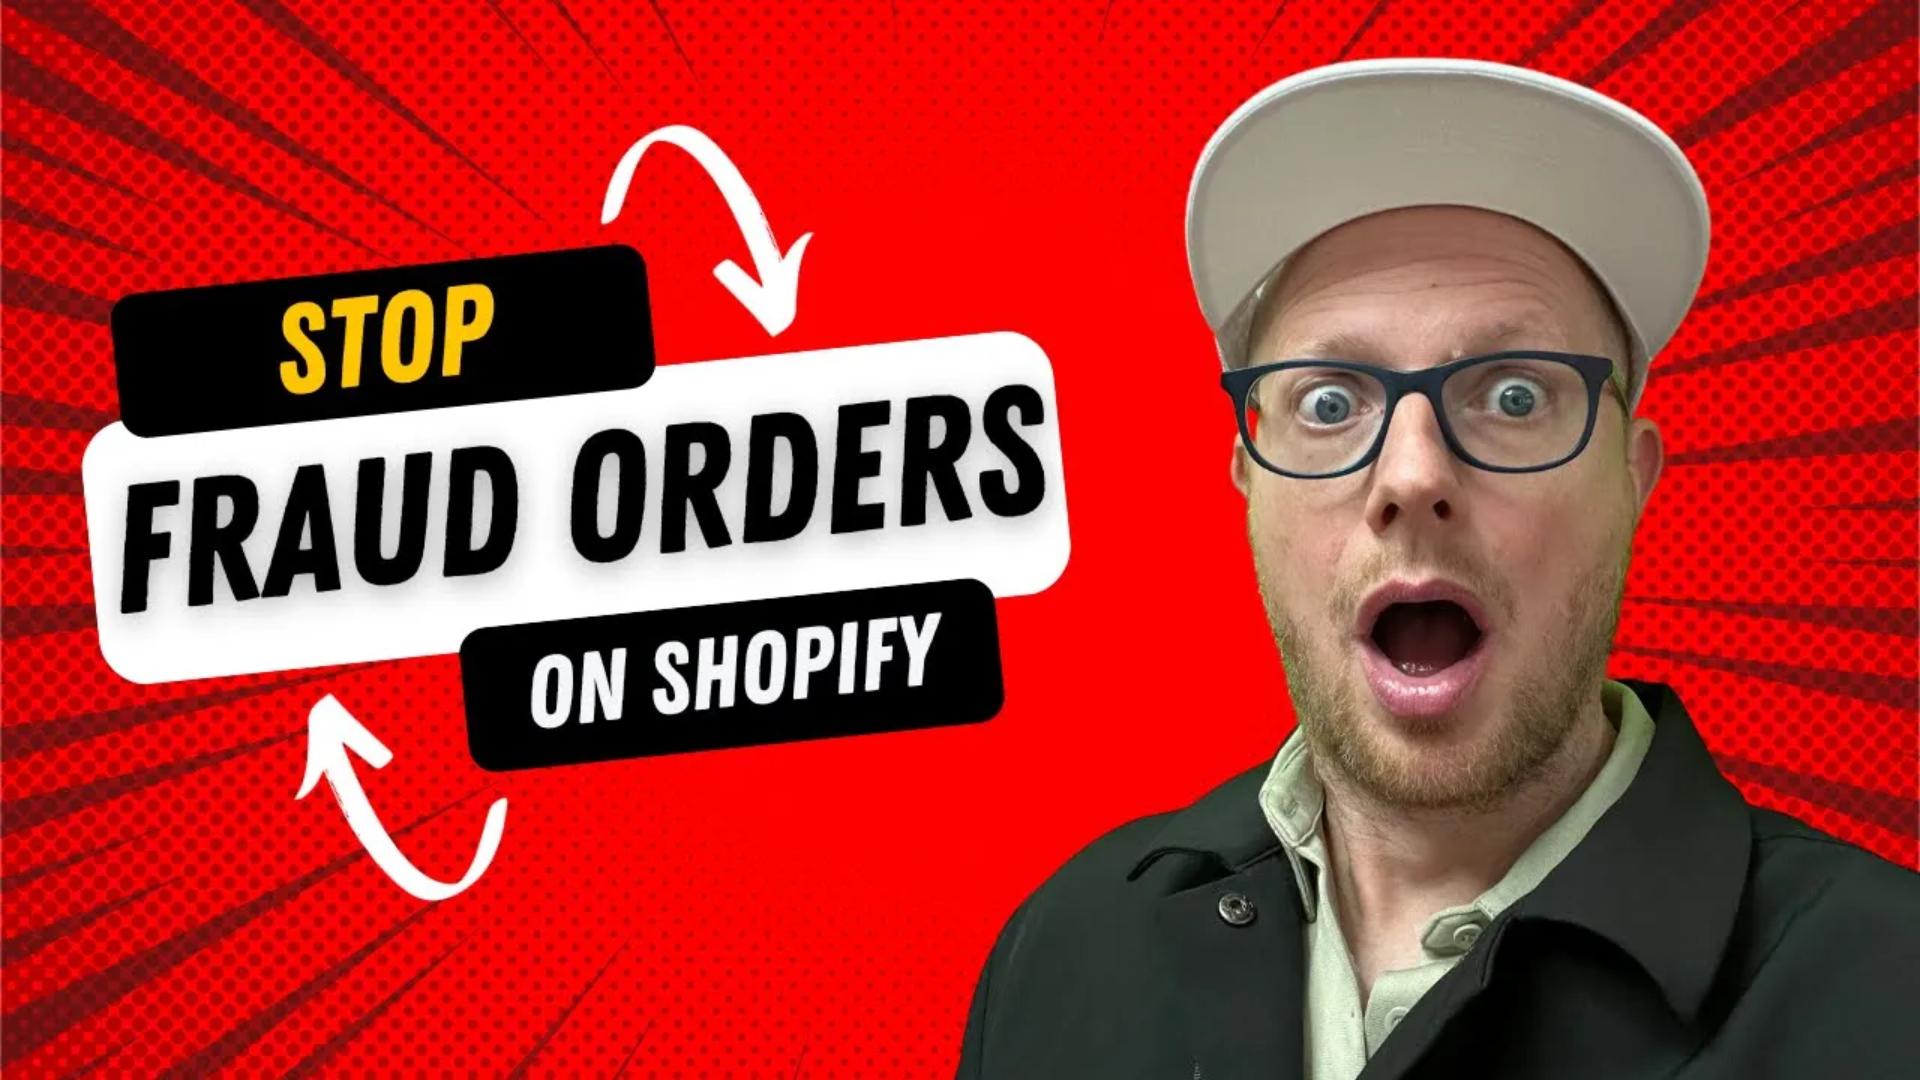 Reduces Fraudulent Orders on Shopify